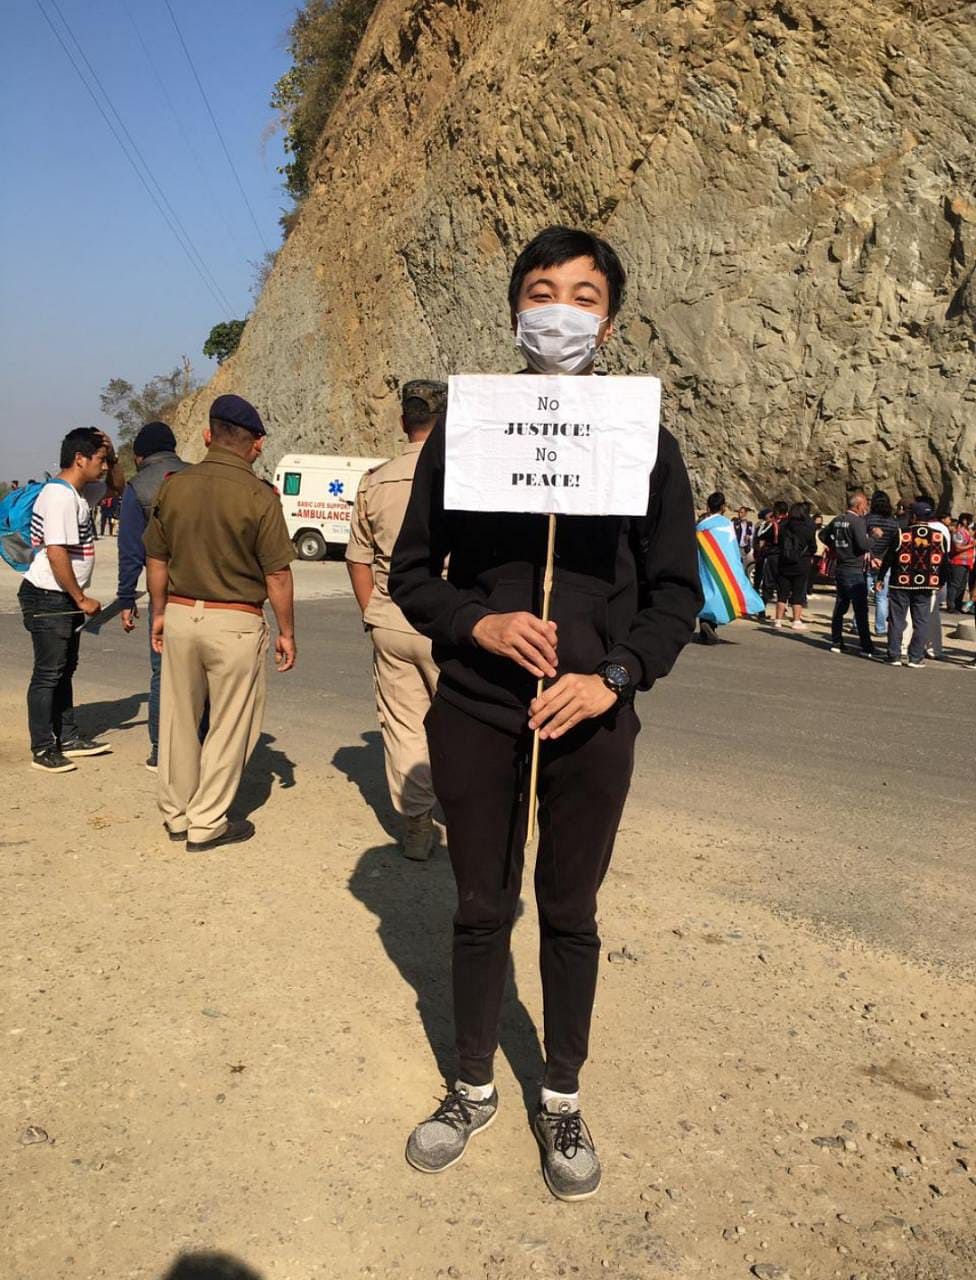 A two-day march against AFSPA from Dimapur to Kohima in Nagaland, covering a distance of 75 km started on Monday.